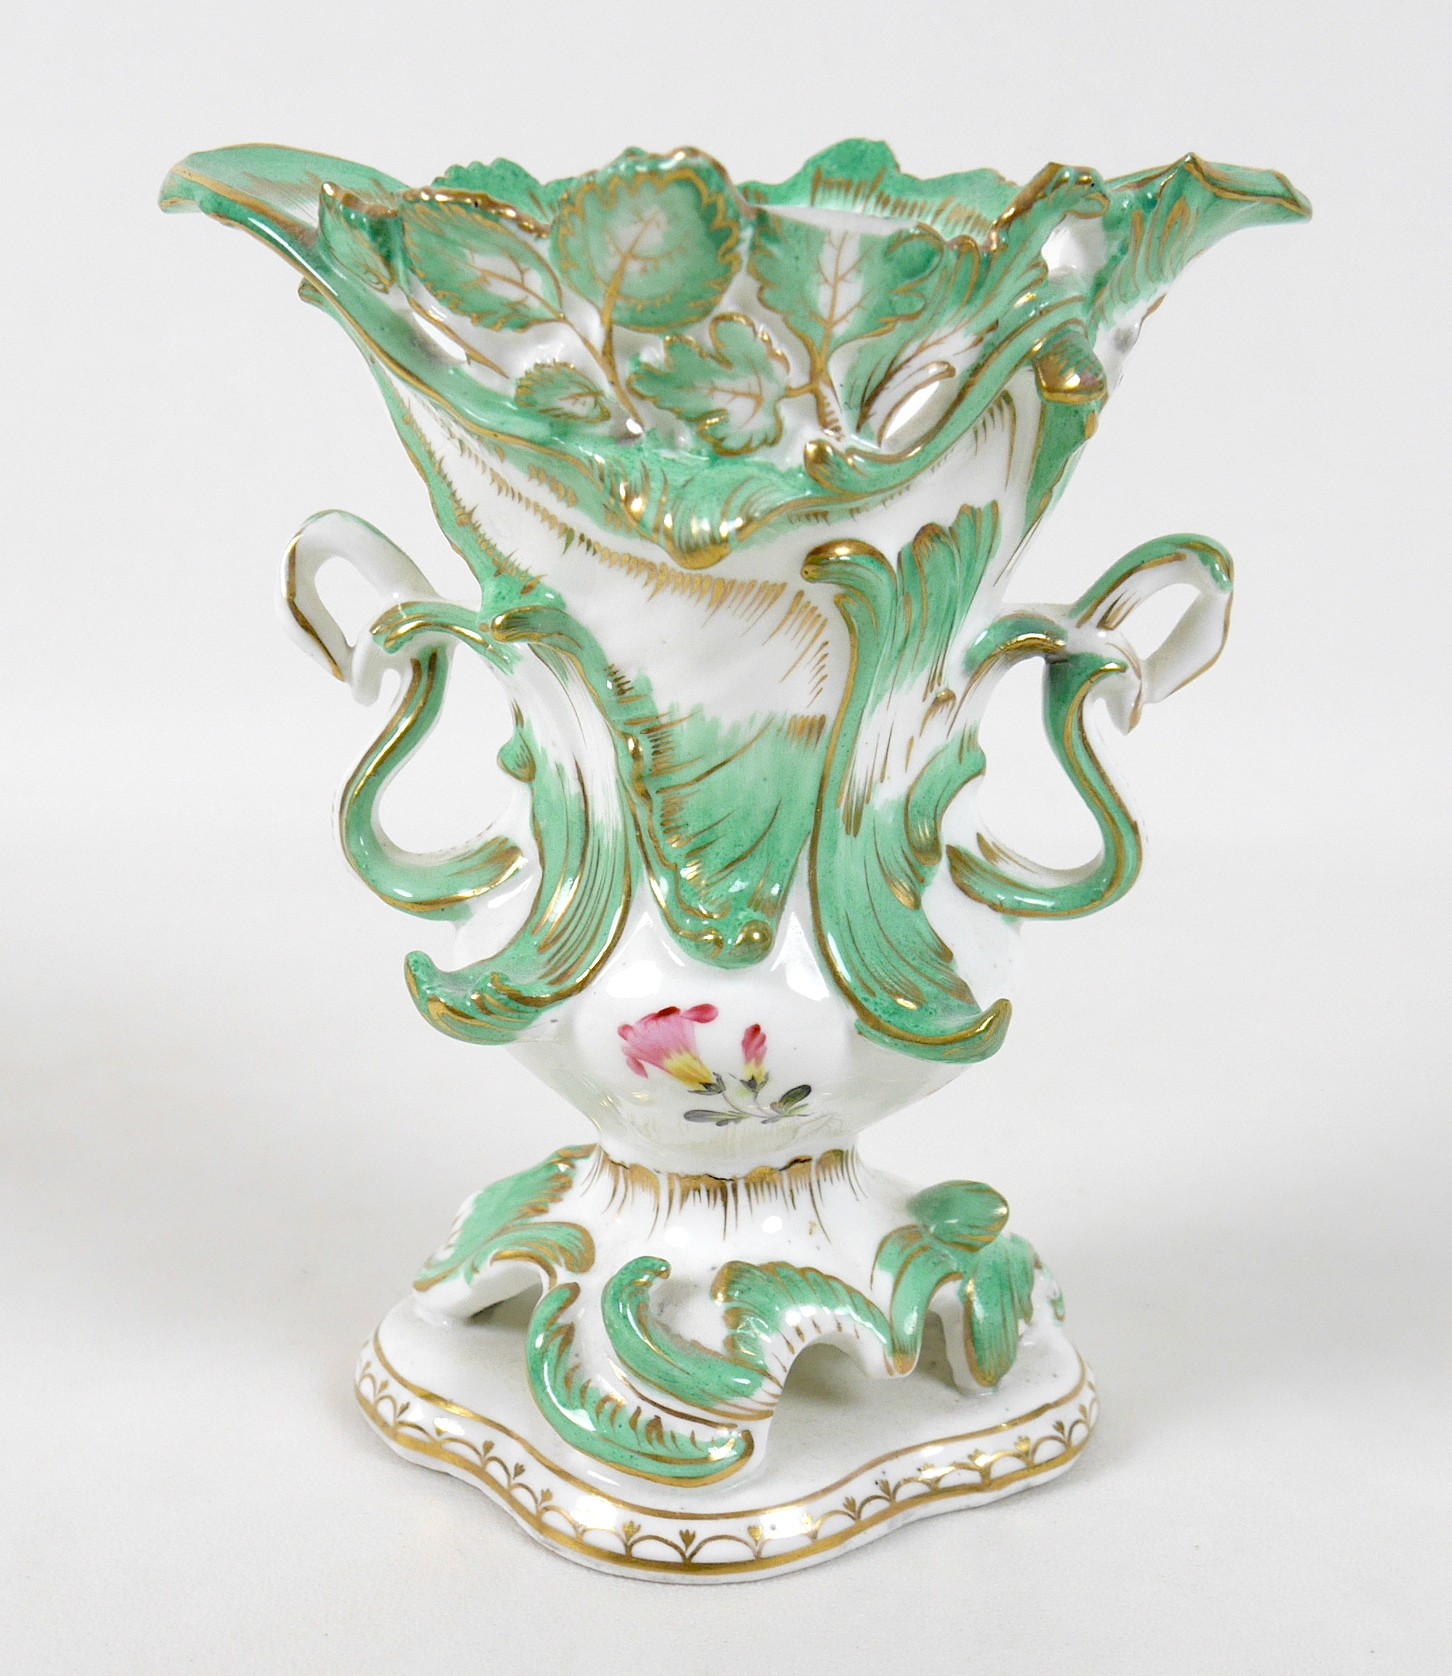 A mid 19th century porcelain Minton vase, decorated in Rococco taste with green and gilt scrolls and - Image 3 of 5